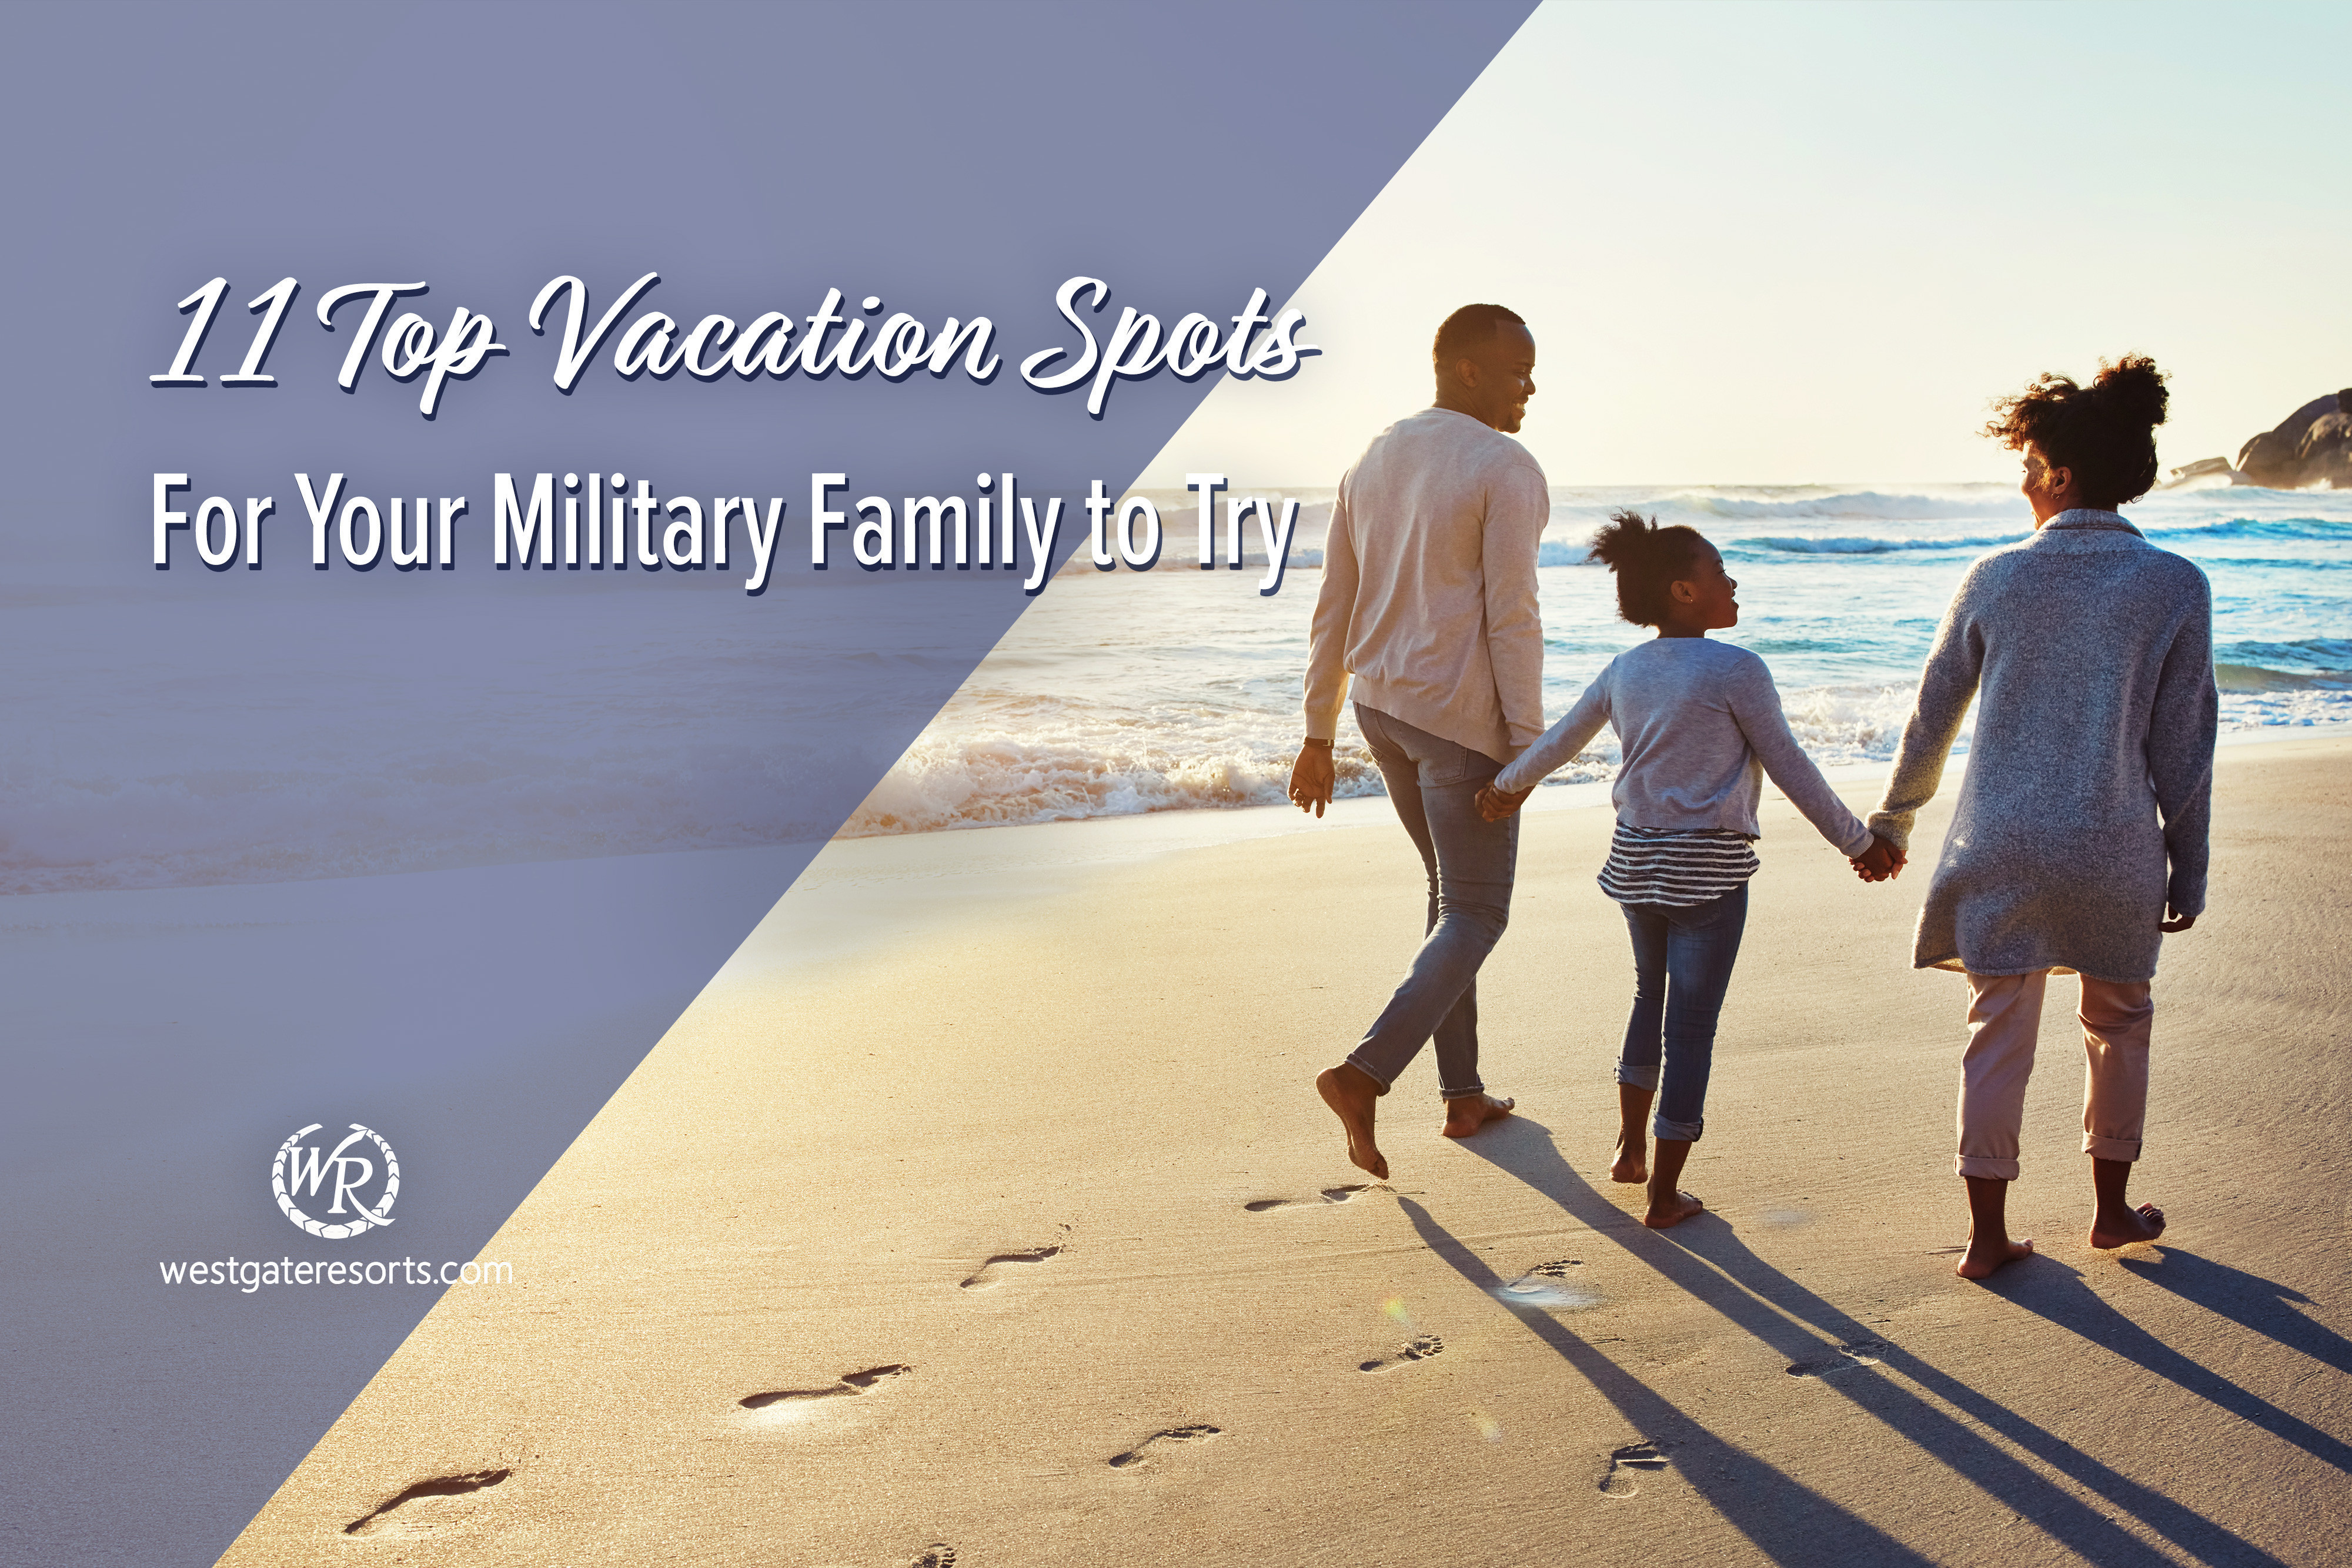 11 Top Vacation Spots For Your Military Family to Try